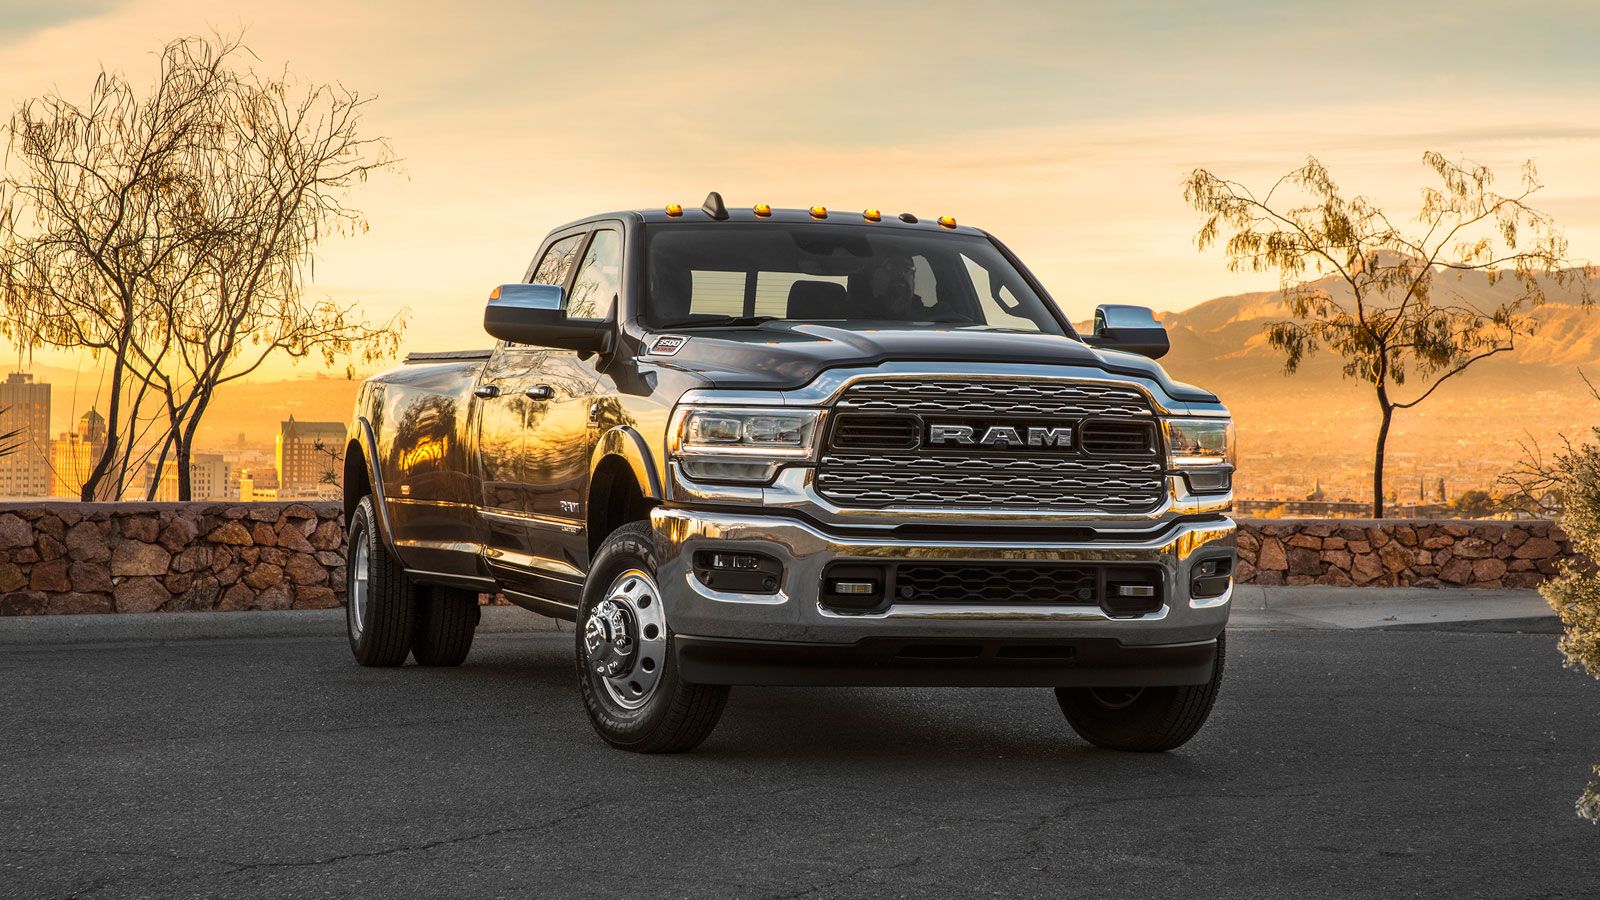 2019 Ram Heavy Duty first drive: Complex problems, complex answers